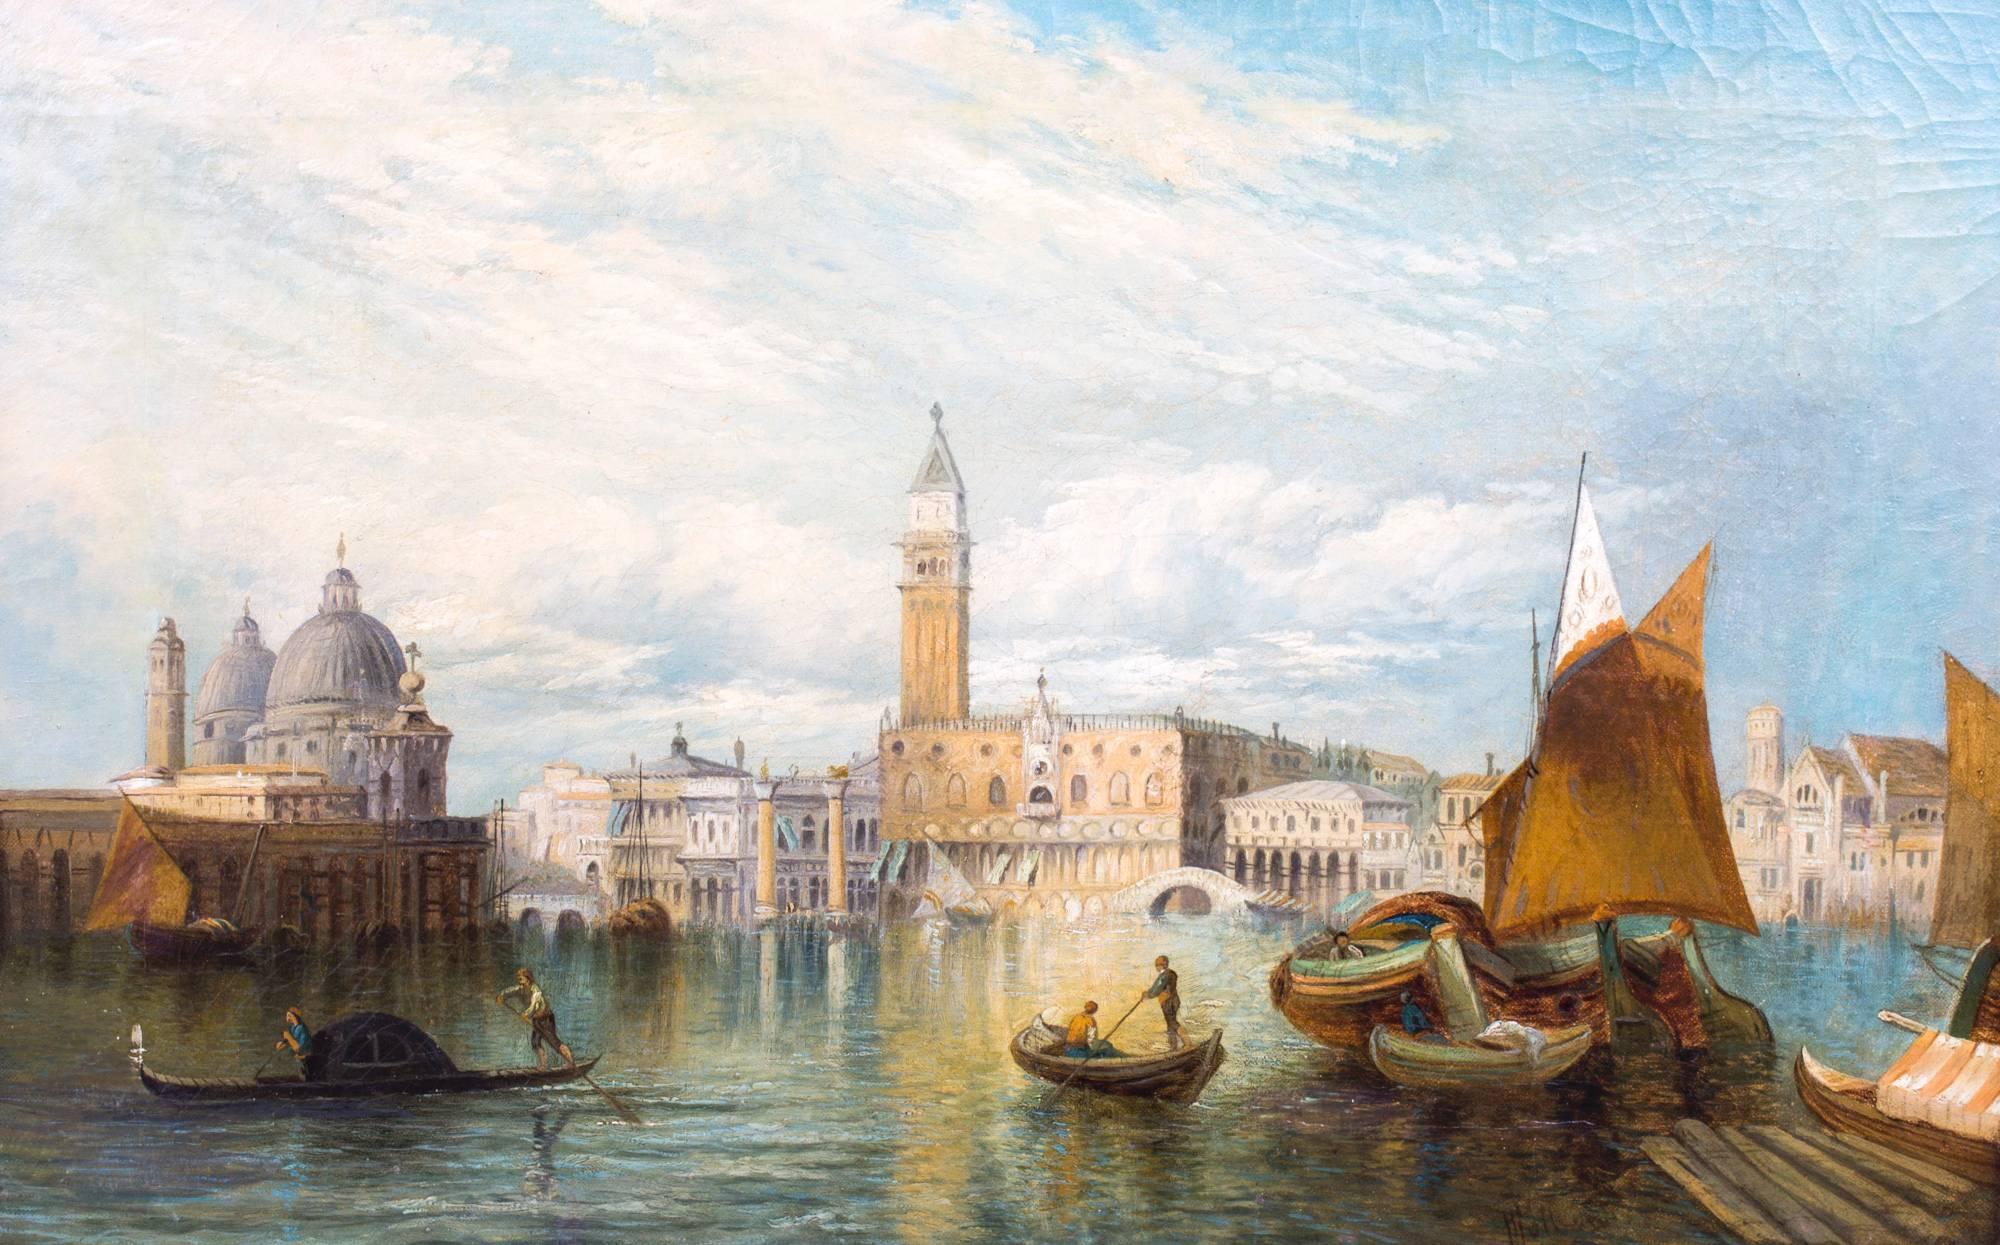 This is a beautiful oil on canvas painting of the Grand Canal in Venice by the renowned British artist Alfred Pollentine (1836-1890) and signed lower right.

This beautiful landscape captures a striking view of the Grand Canal, it features a busy